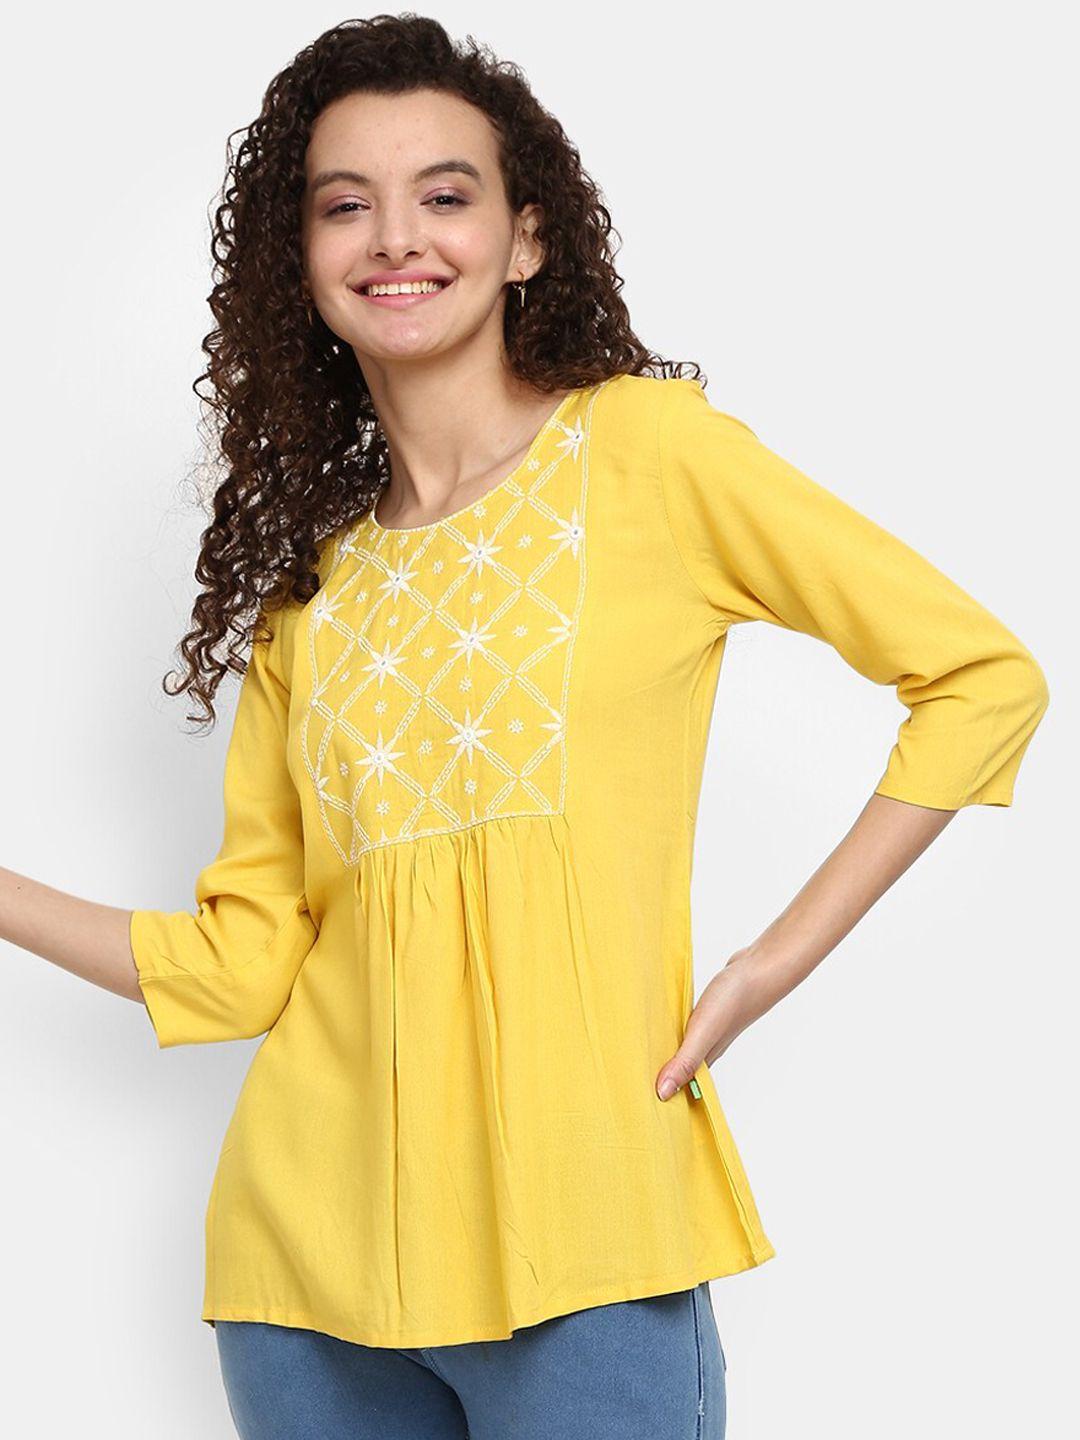 v-mart yellow floral embroidered pure cotton round neck top